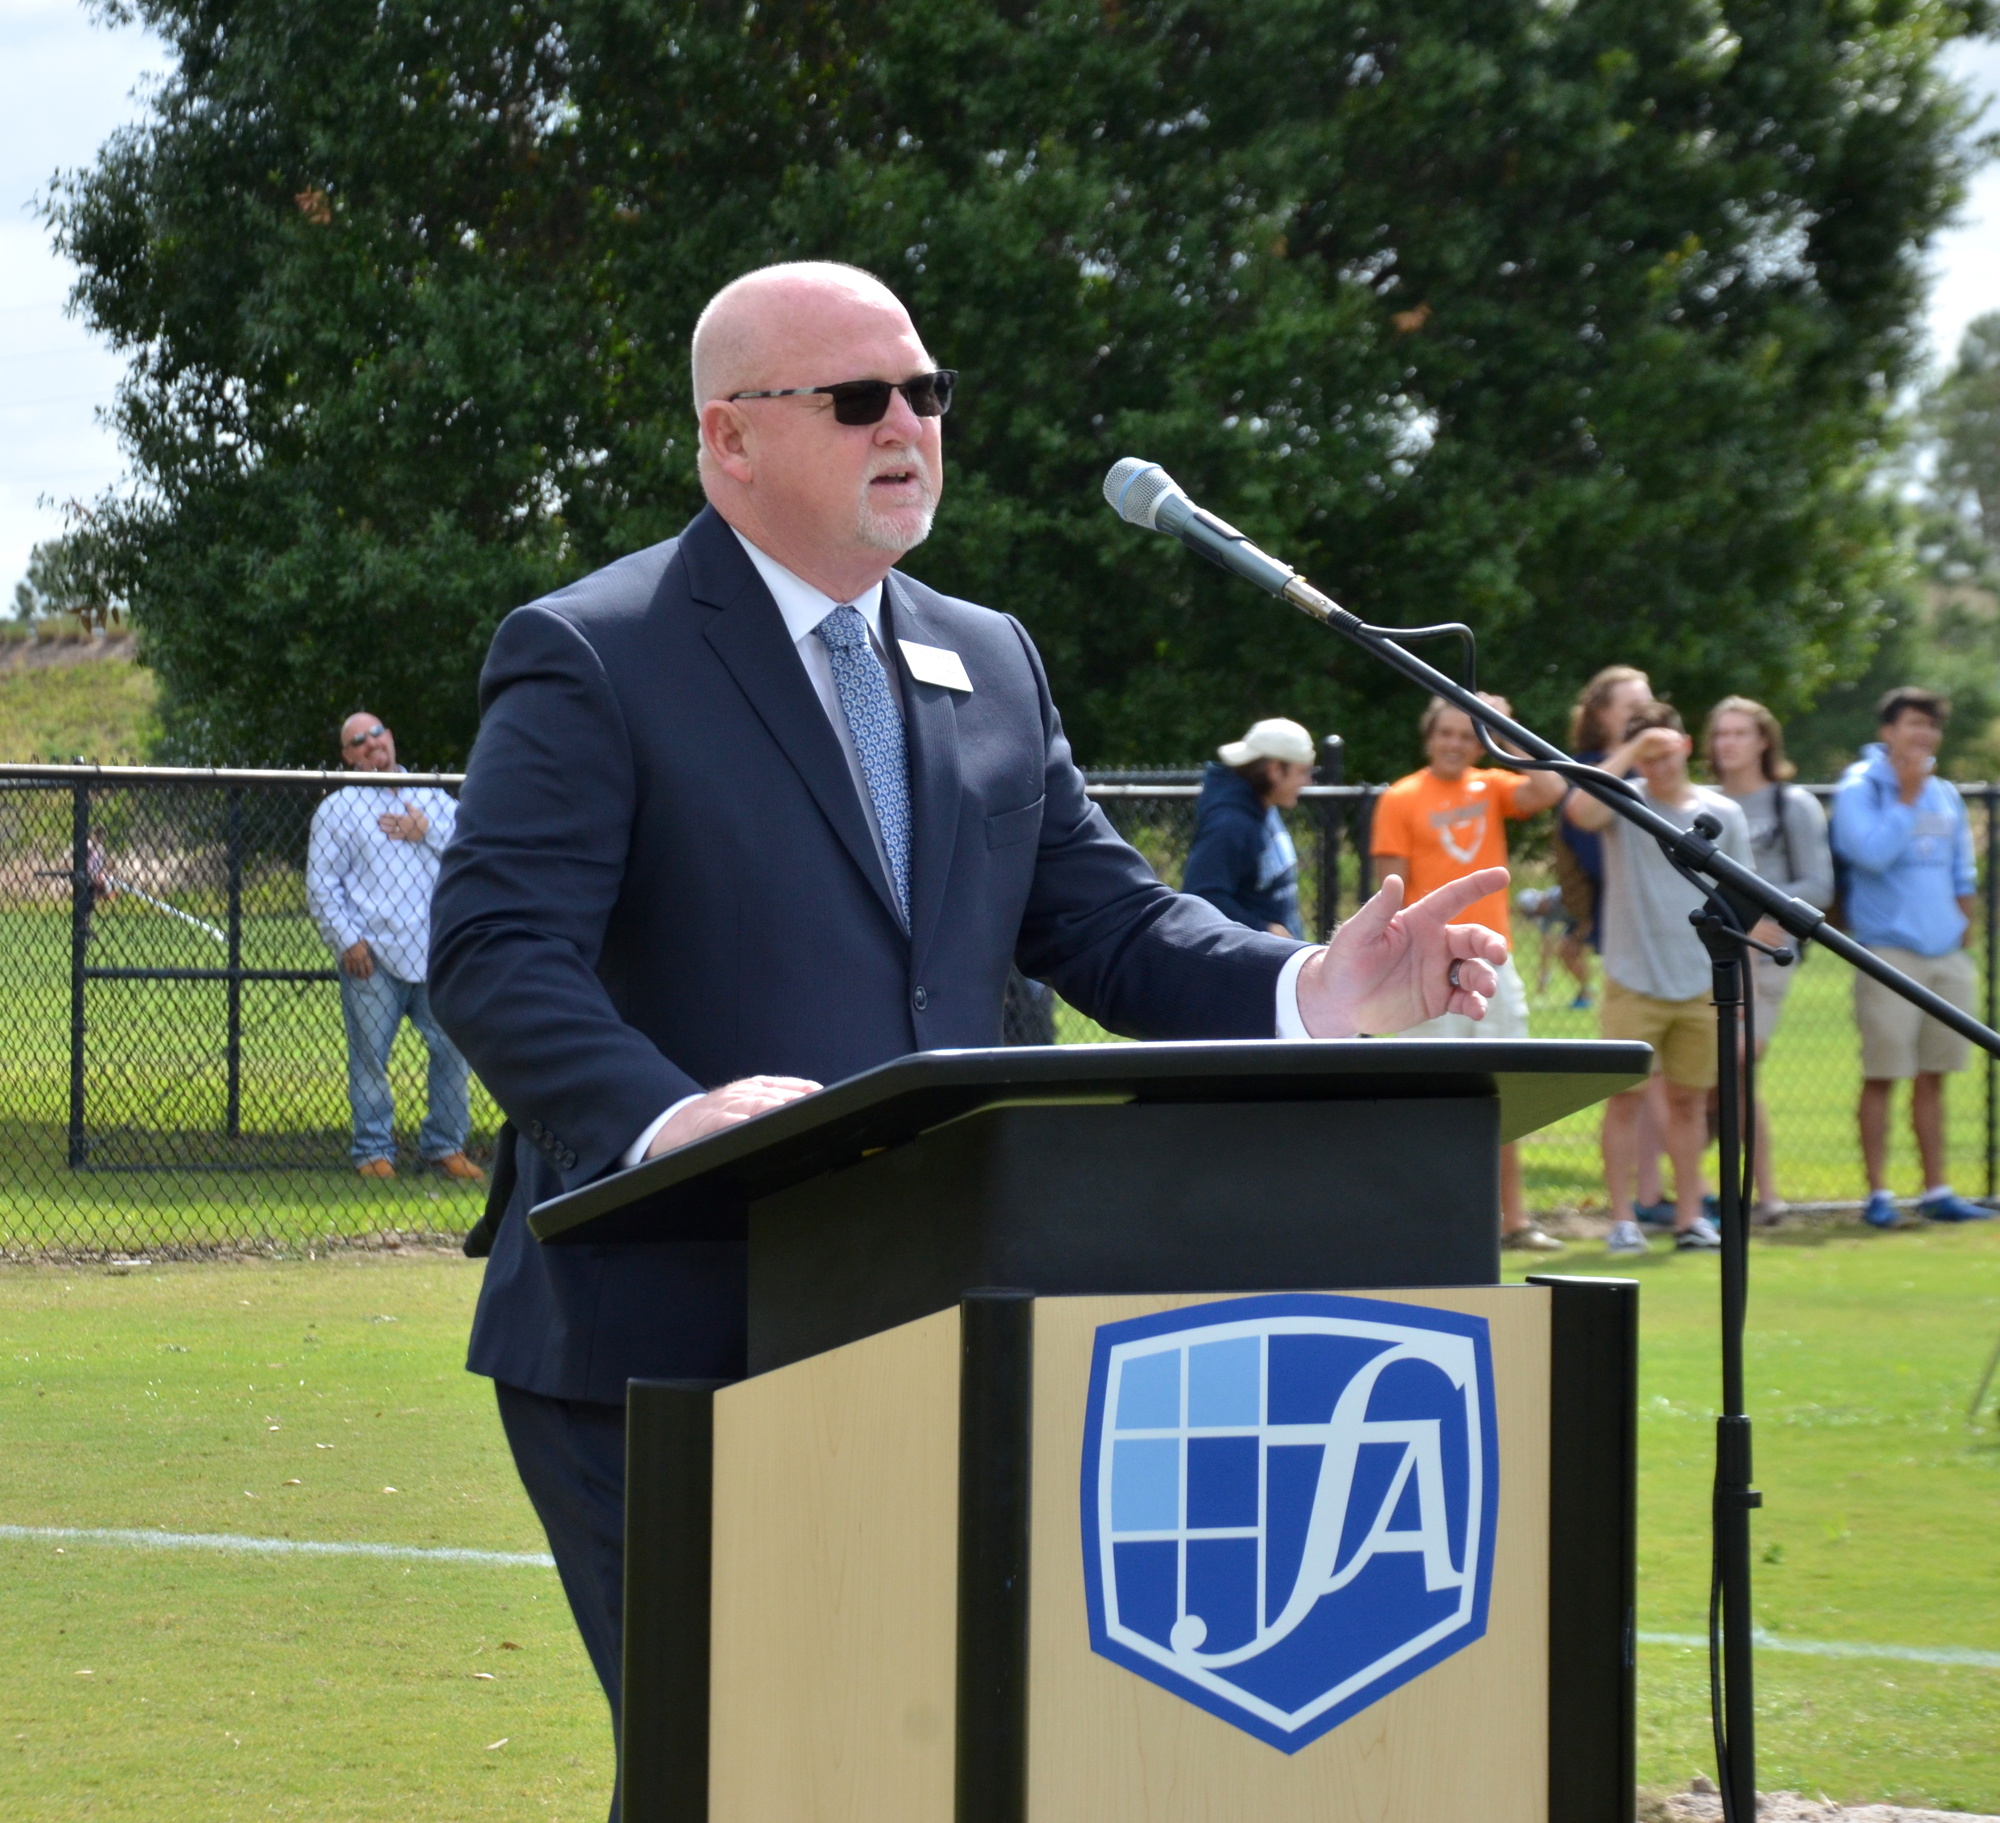 David Buckles has been the president of Foundation Academy for the past three years.